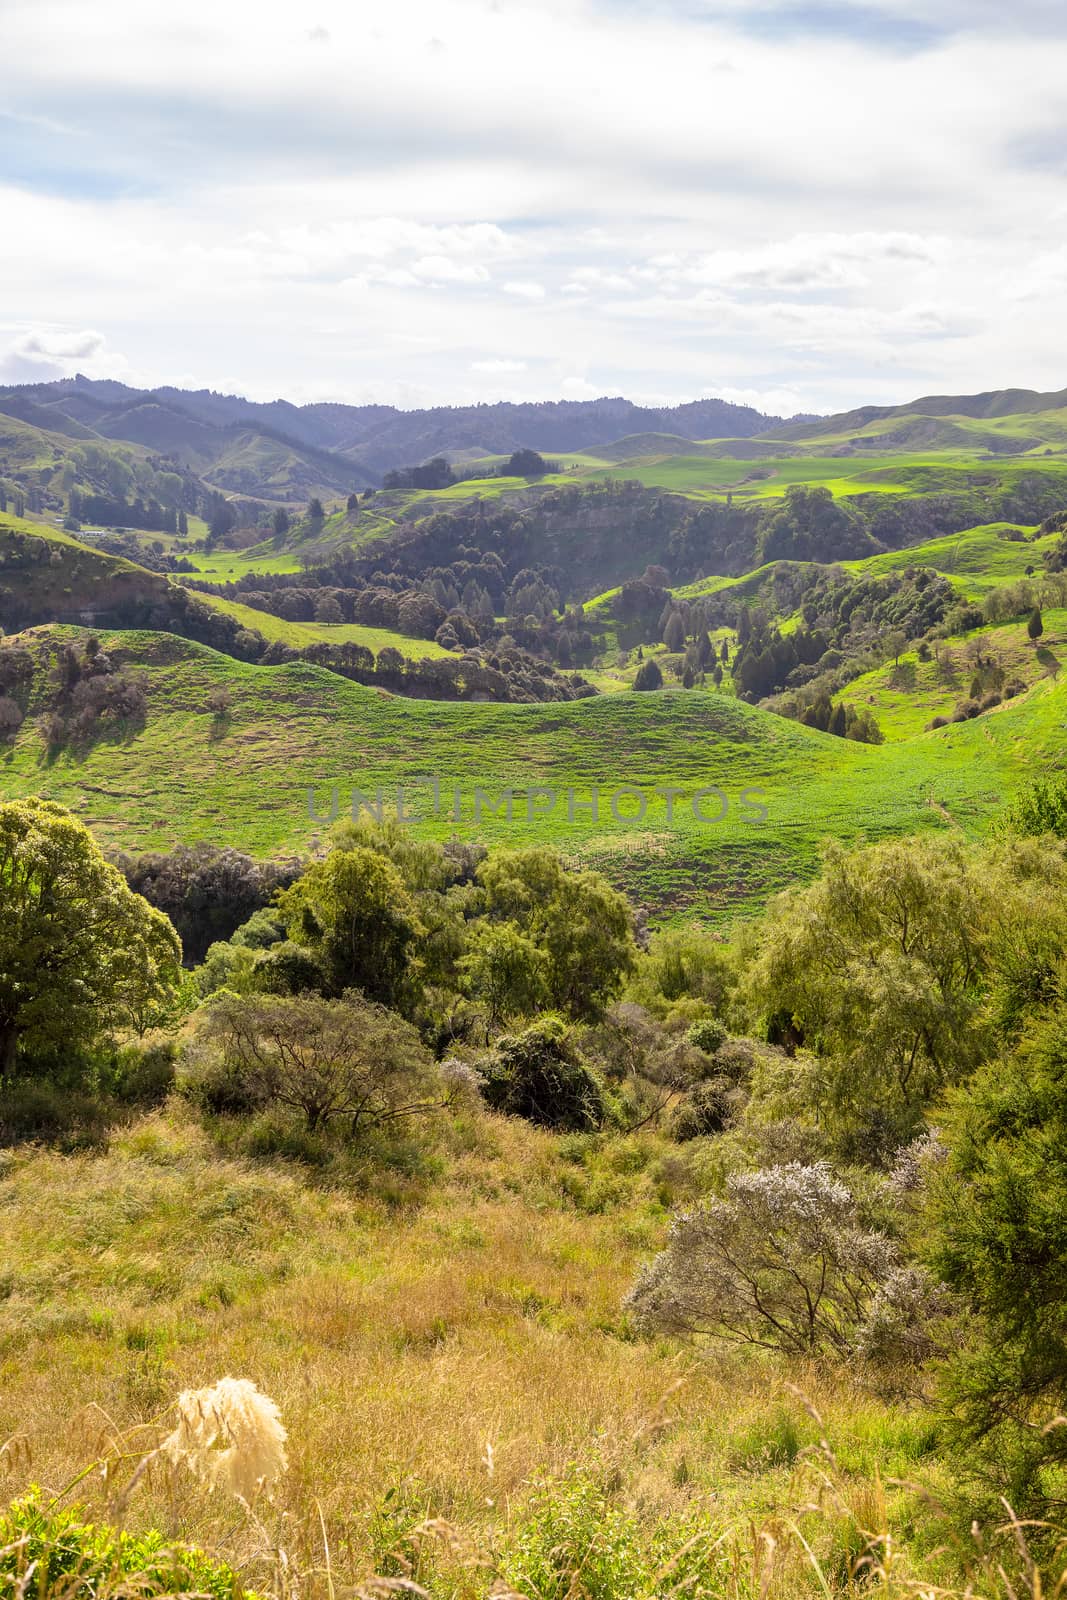 An image of a typical rural landscape in New Zealand